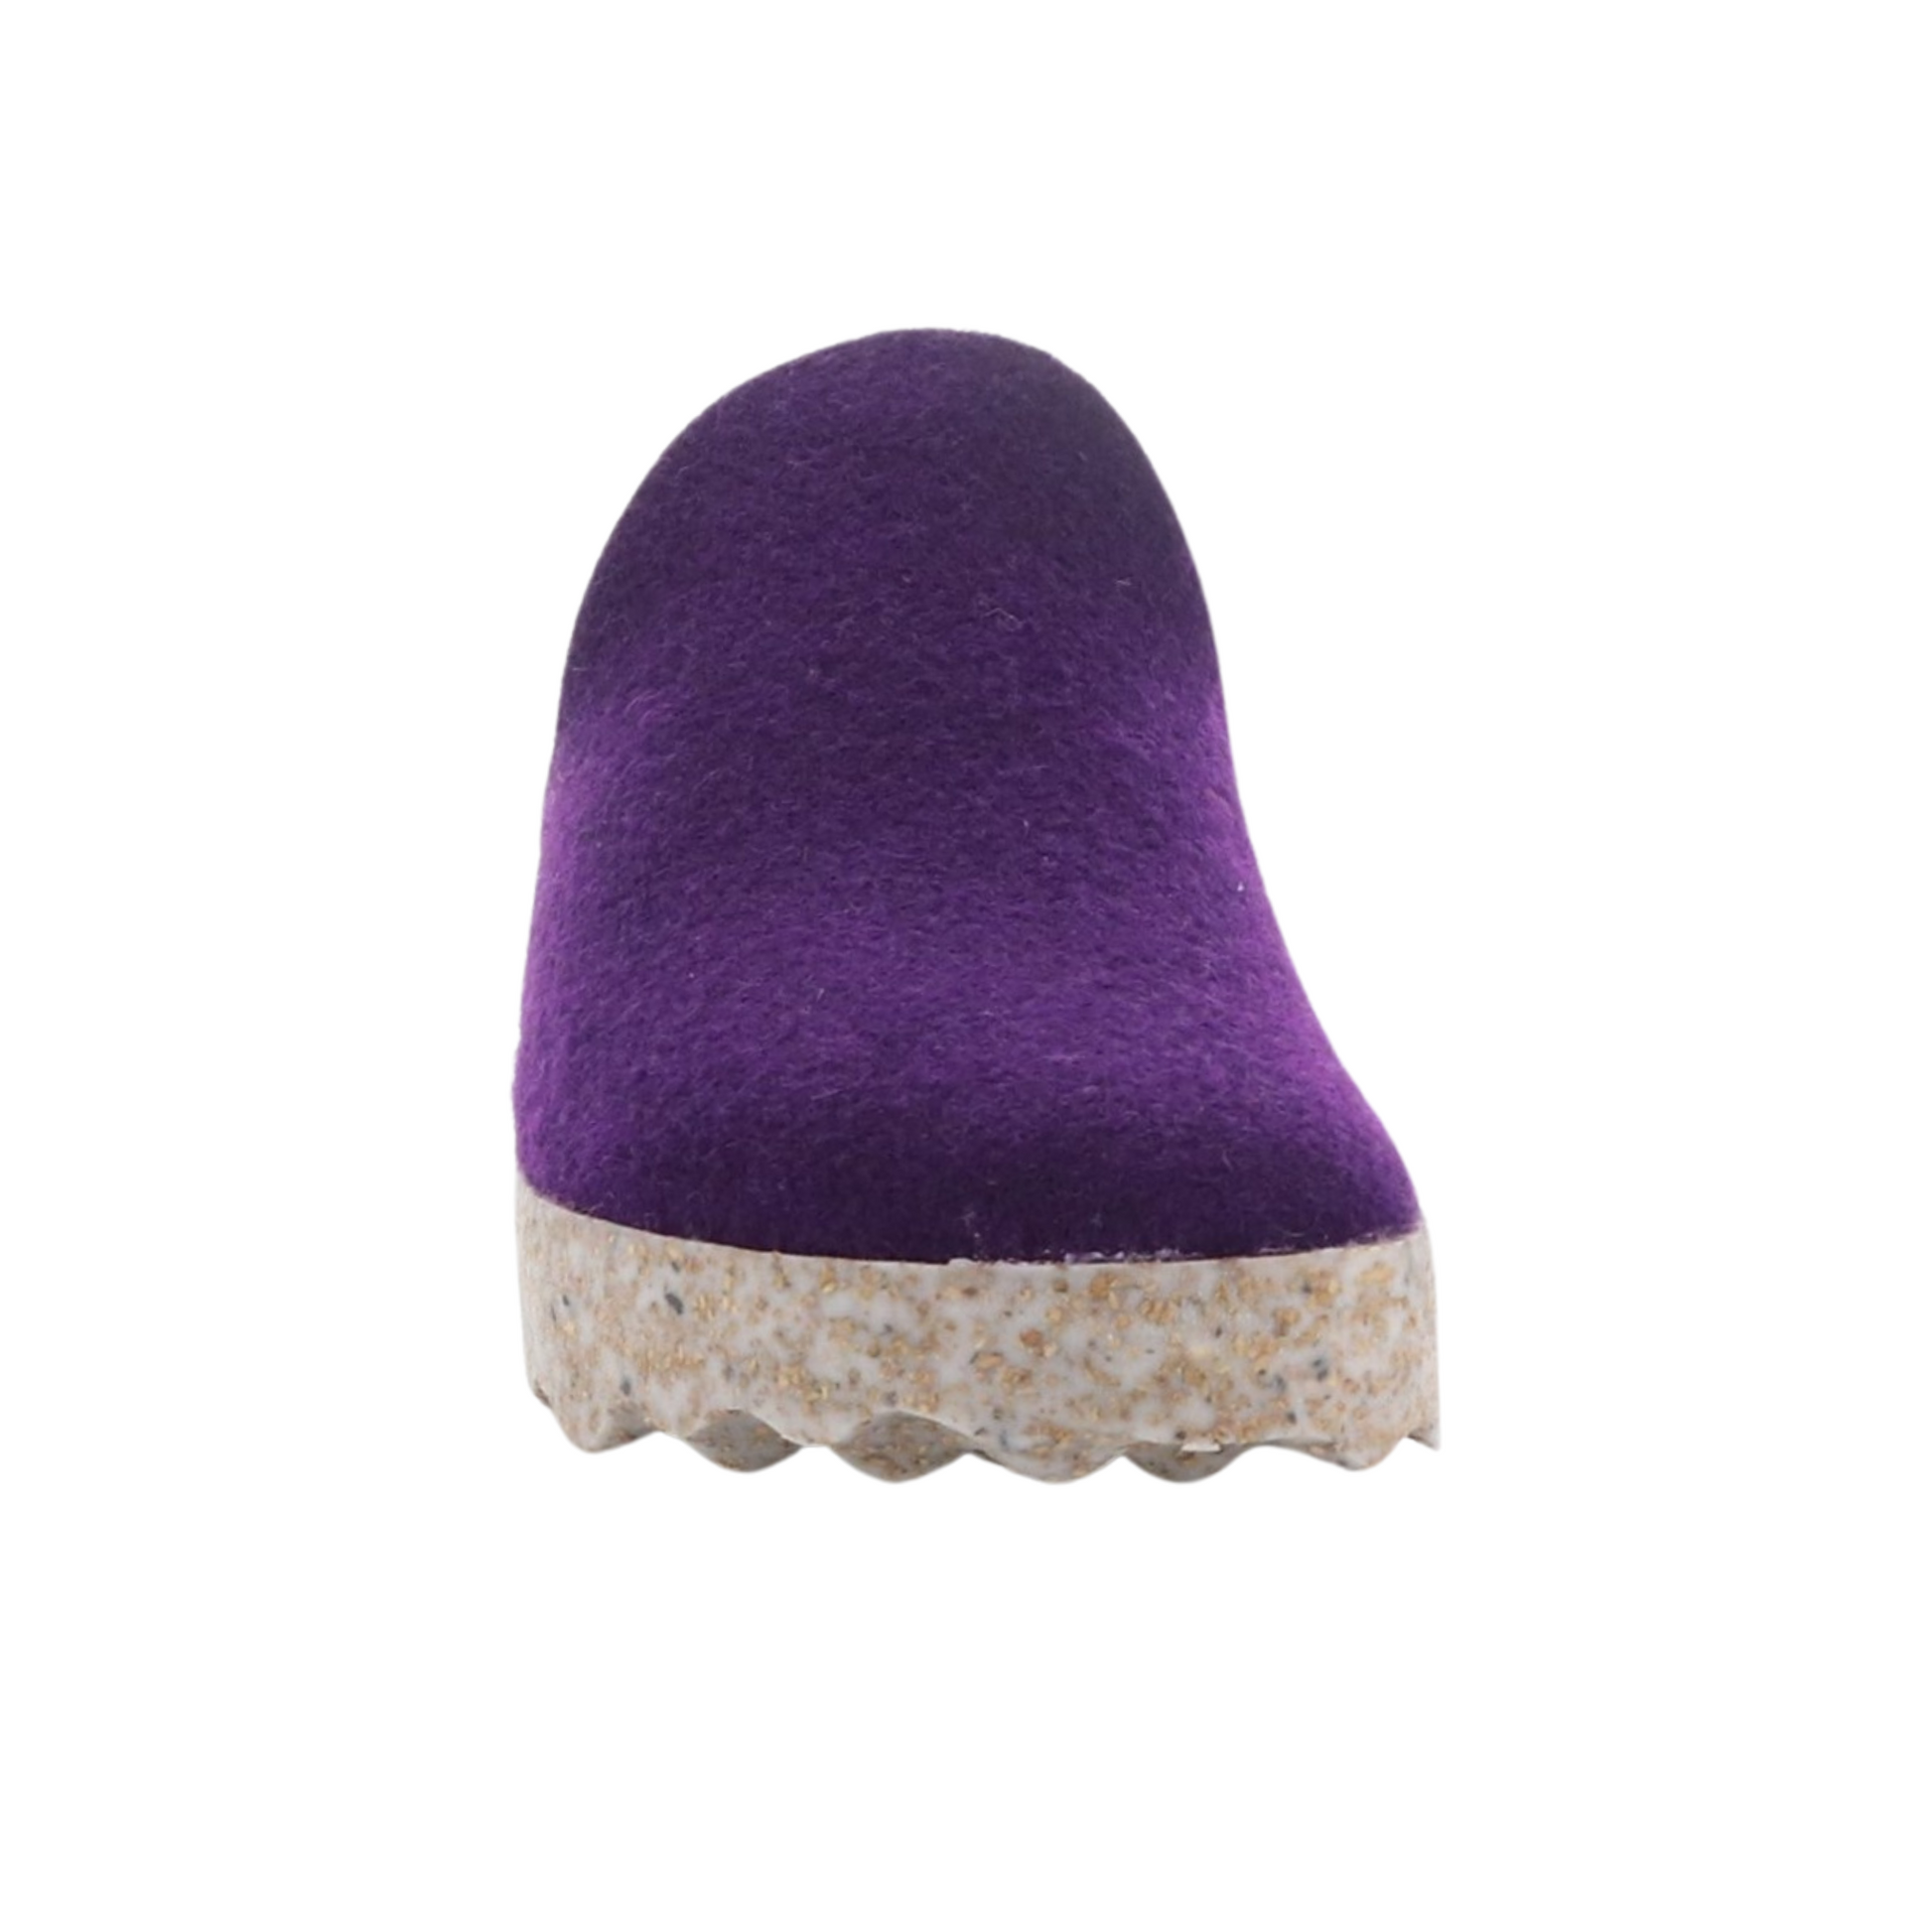 A purple speckled thick sole slipper shoe is pictured from the front.